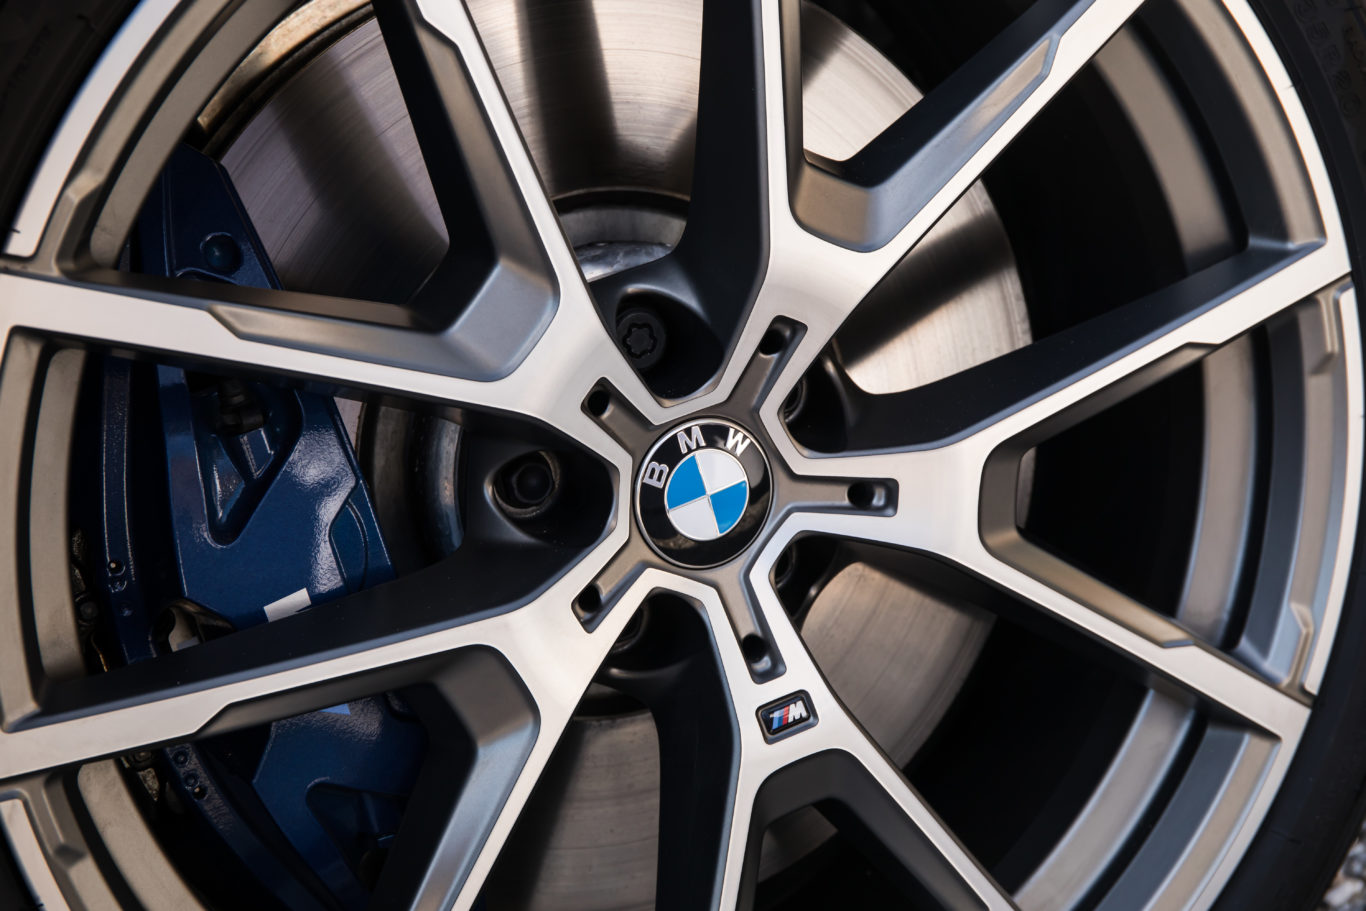 Large alloy wheels add to the 8 Series' presence